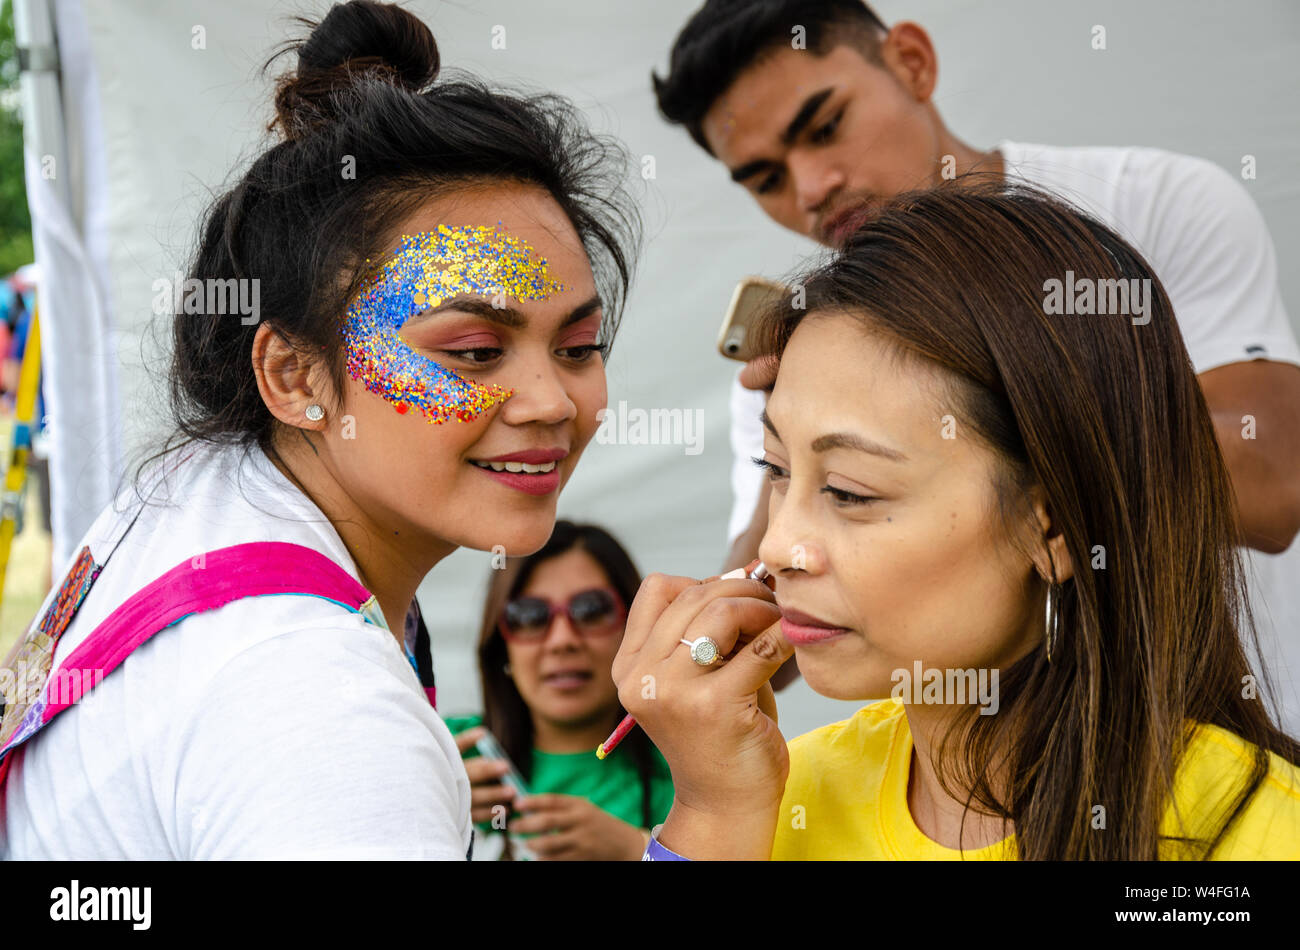 A lady sits and has face paint applied. The artist applying the face paint has face glitter around her eye. Stock Photo